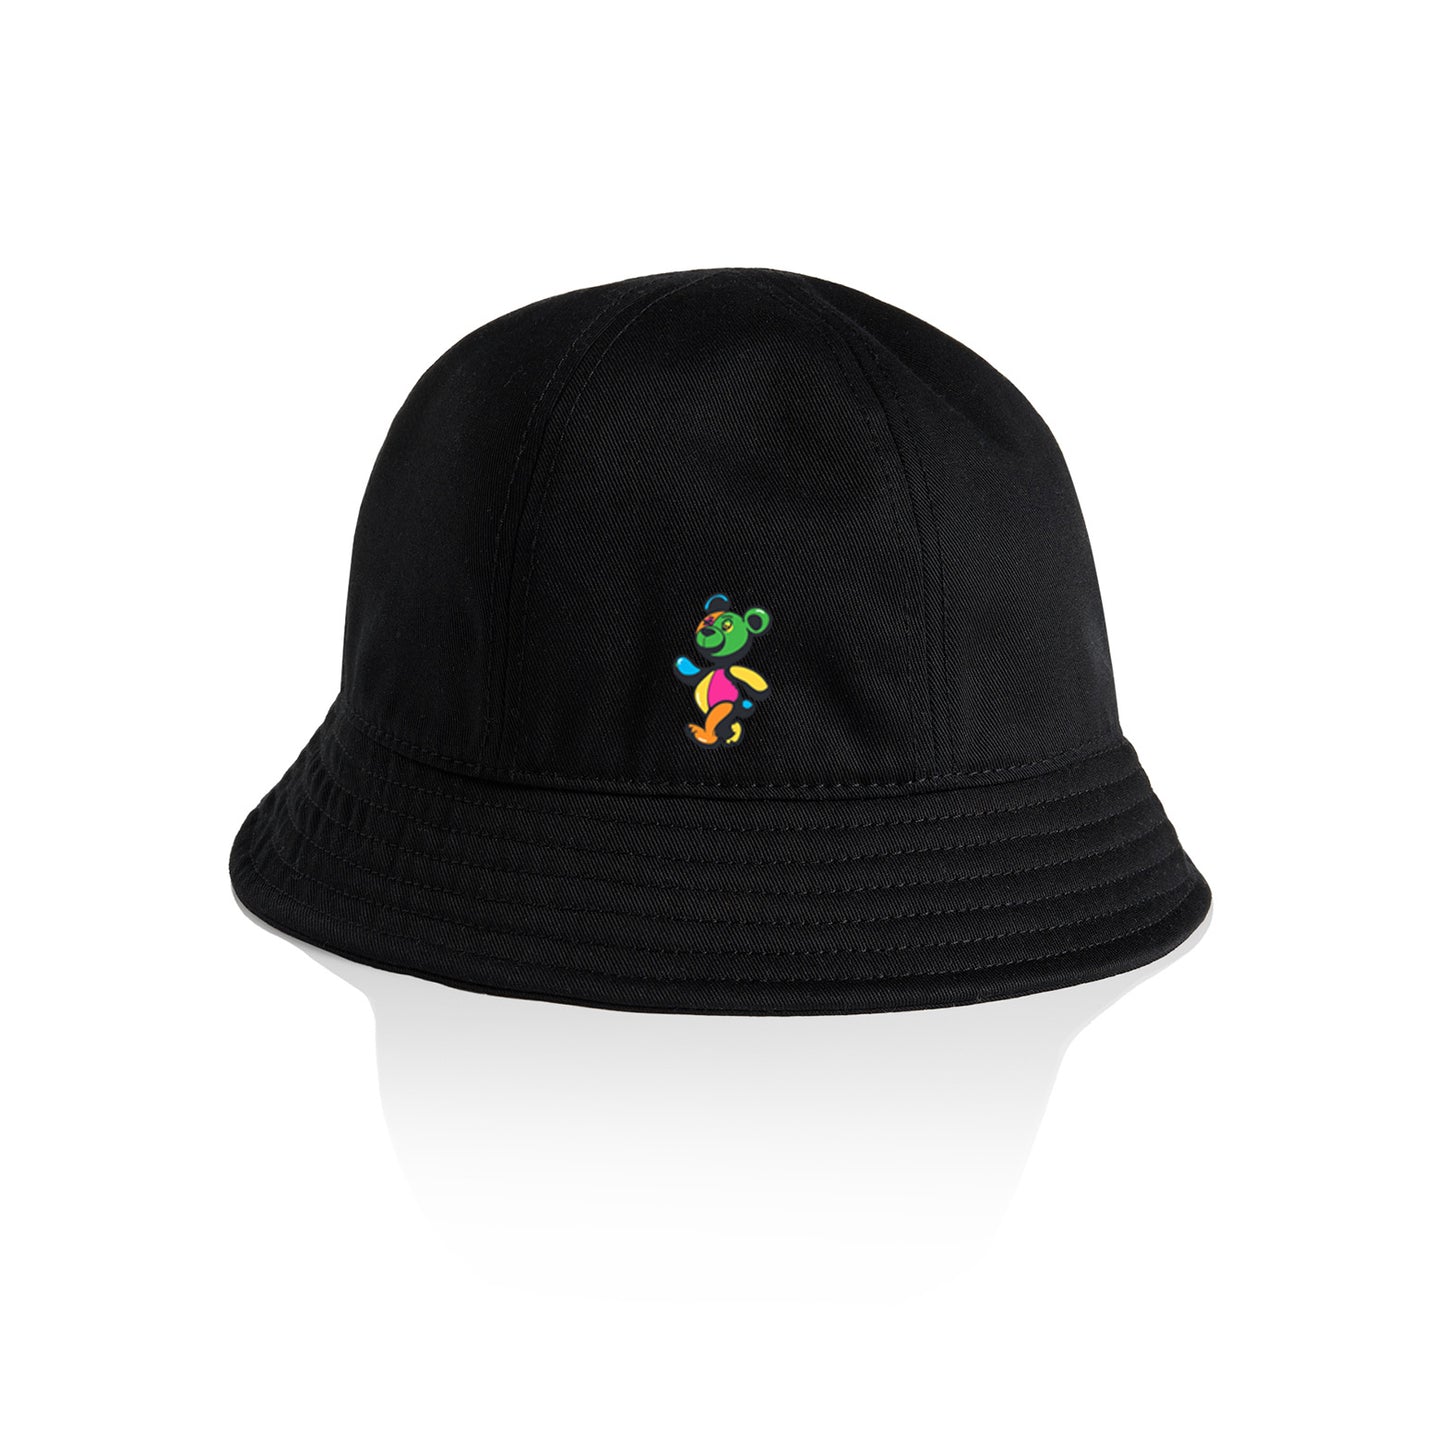 My Edible Kicked In Bears Dem Suga Embroidered Women's Bucket Hat